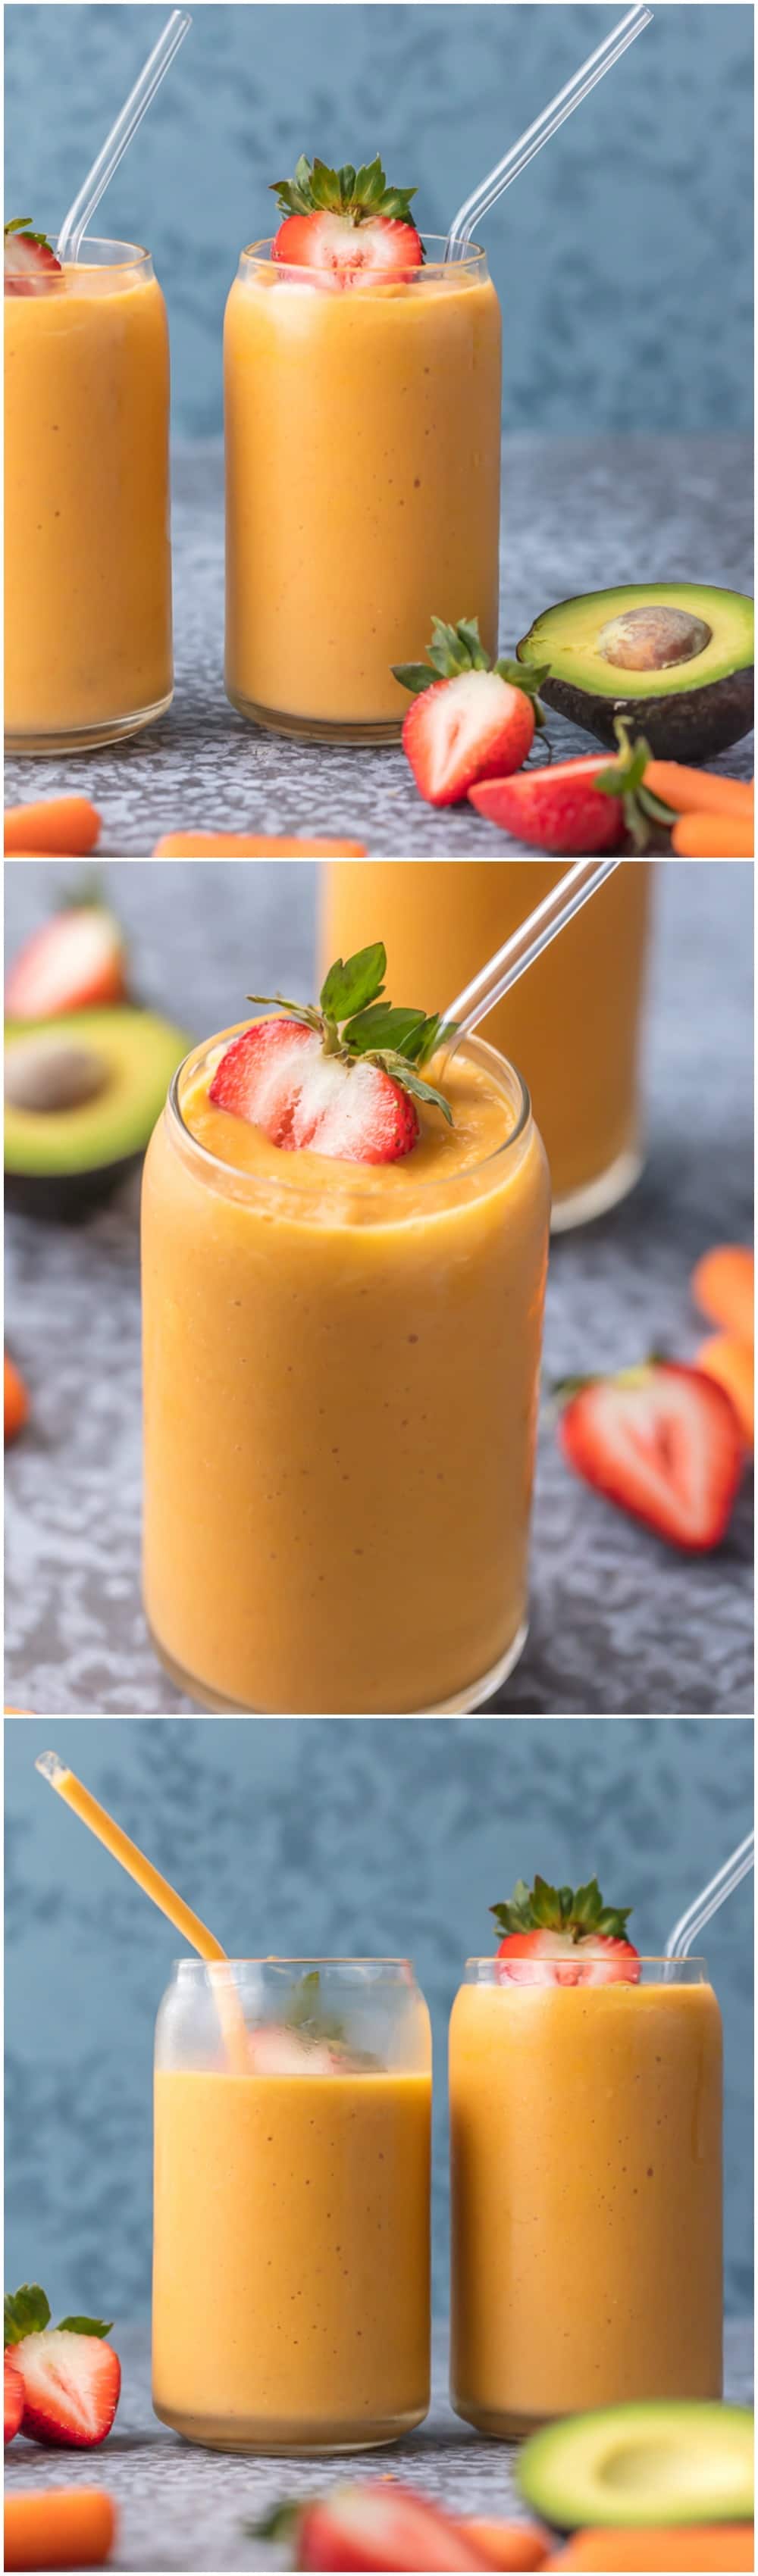 This GLOWING SKIN SMOOTHIE is full of delicious ingredients like coconut water, strawberries, mangoes, carrots, and avocado! Sip your way to beautiful skin with this easy treat.